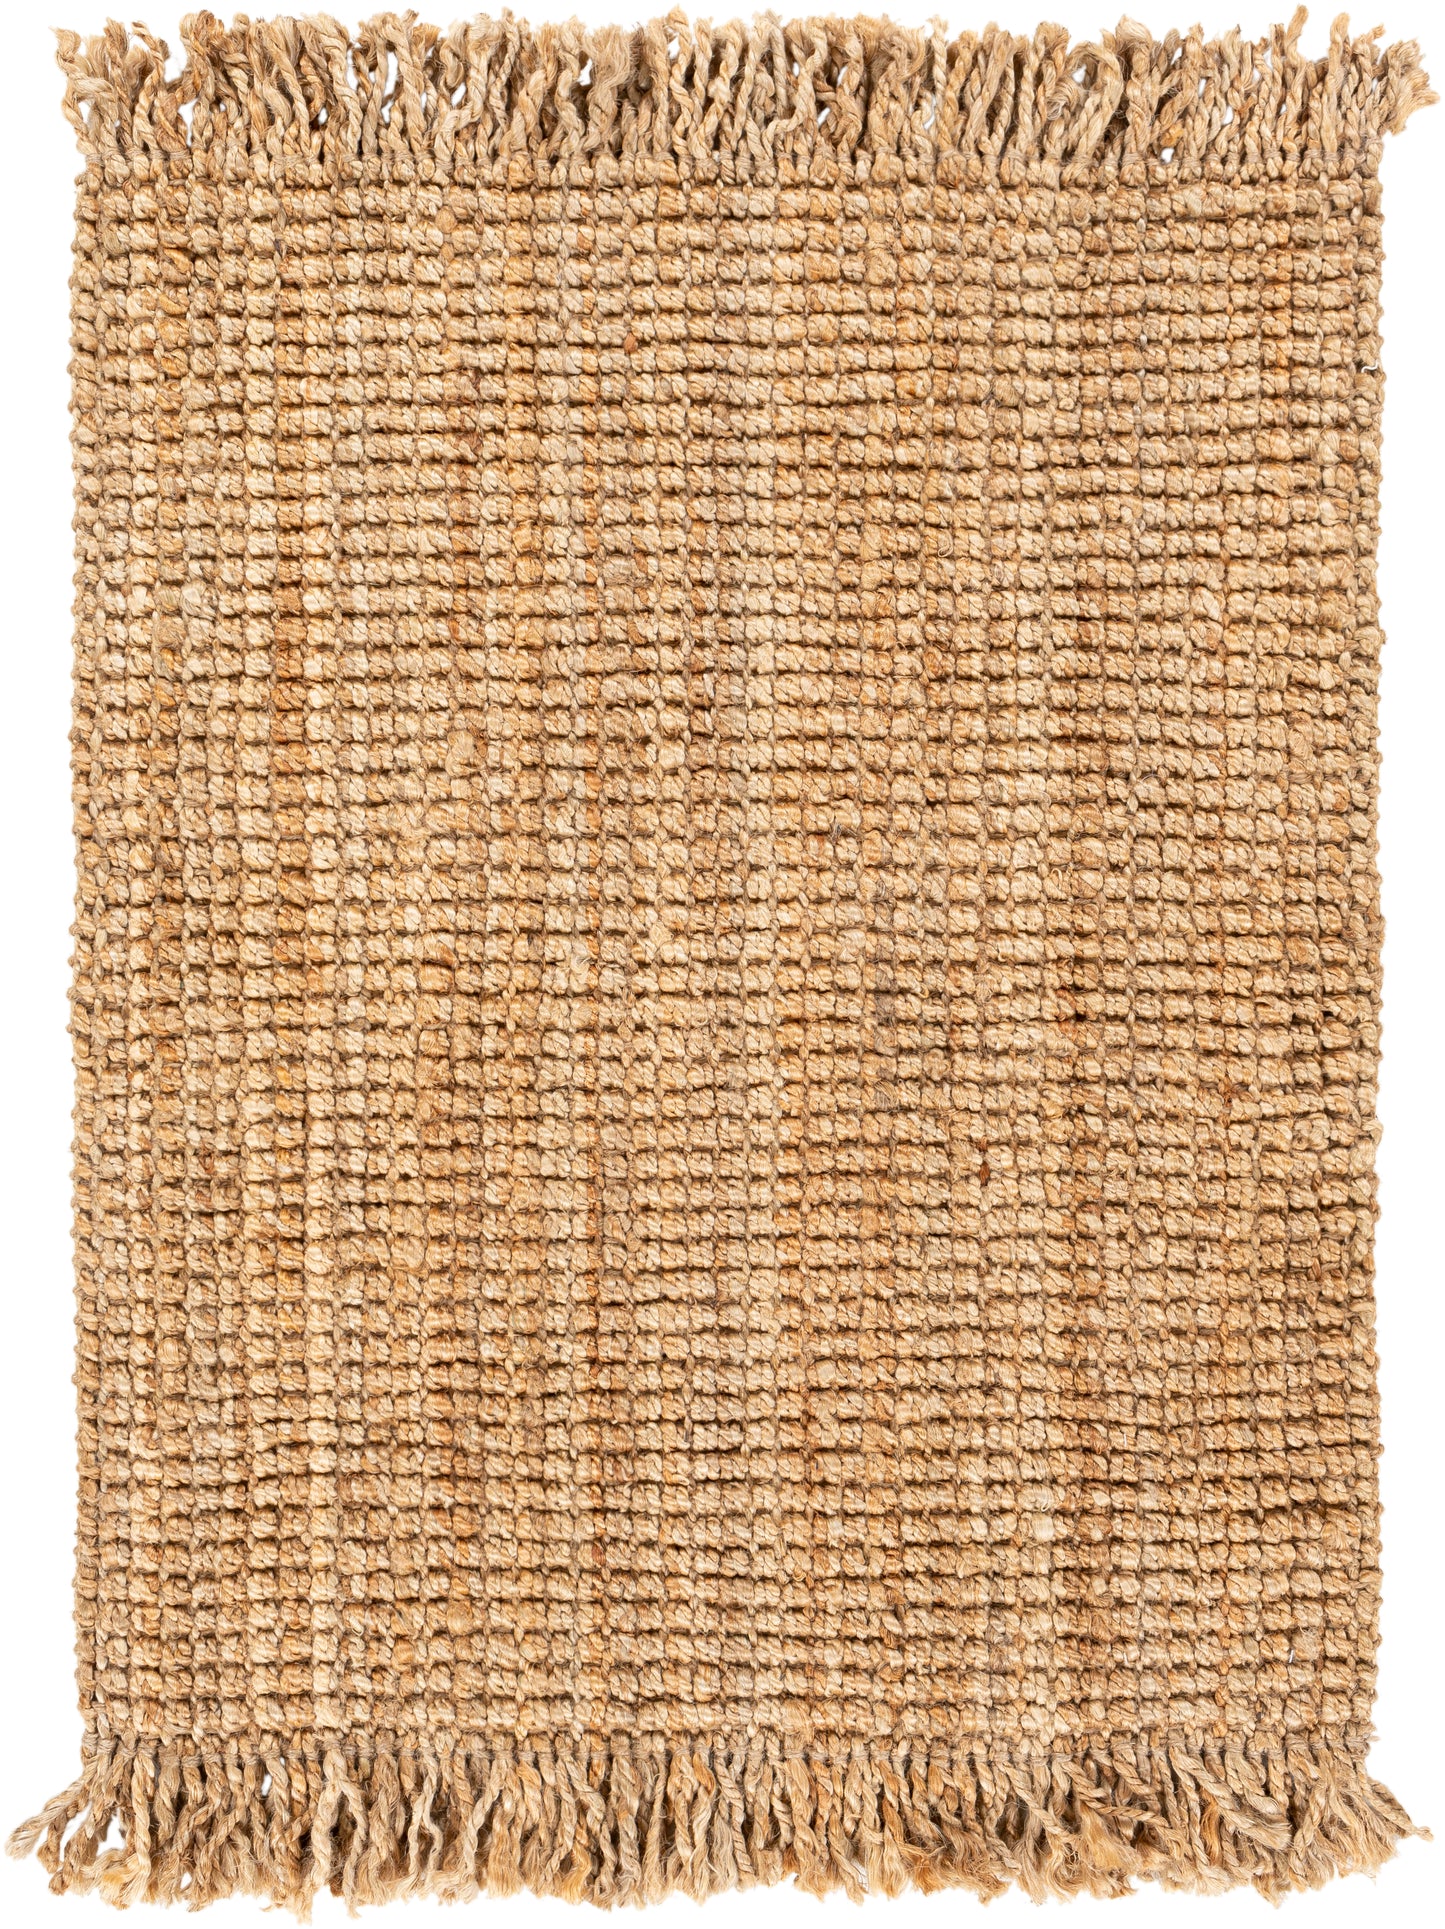 Chunky Naturals 27875 Hand Woven Jute Indoor Area Rug by Surya Rugs